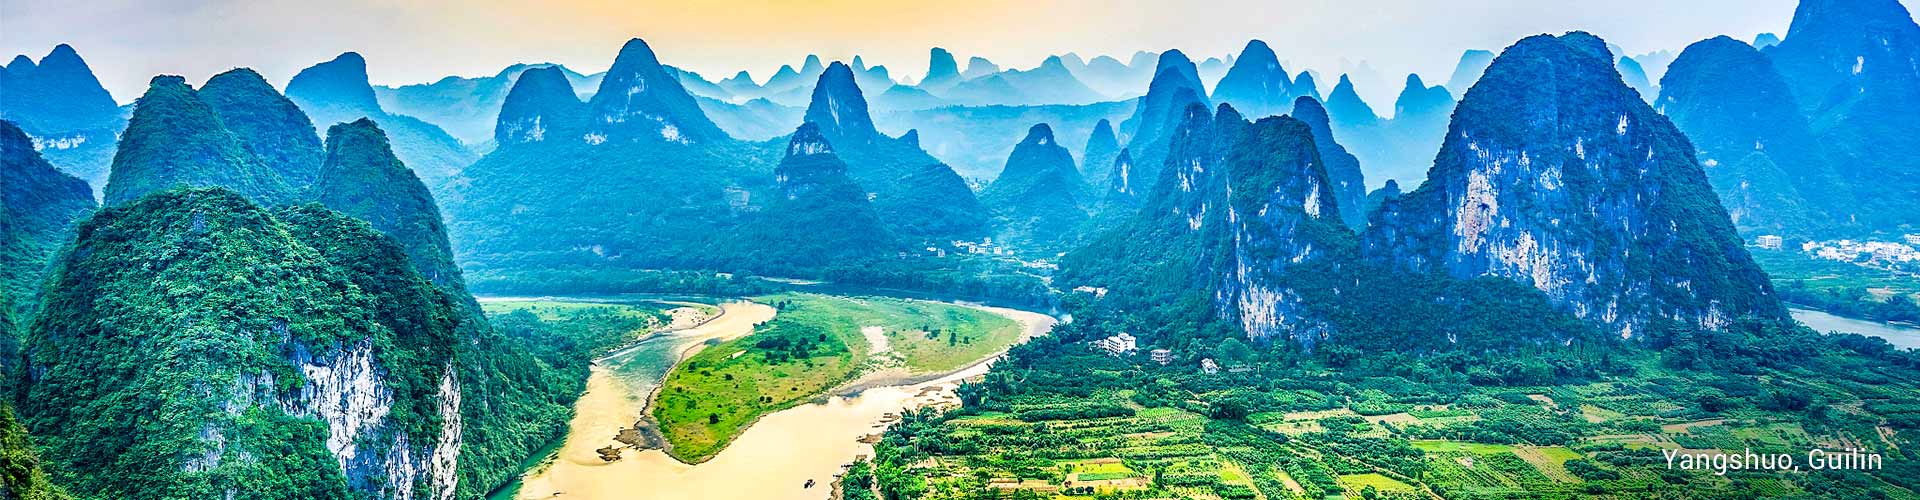 Admire the top karst landscape in Guilin and Yangshuo and take a cruise on the Li River with breath-taking scenery.